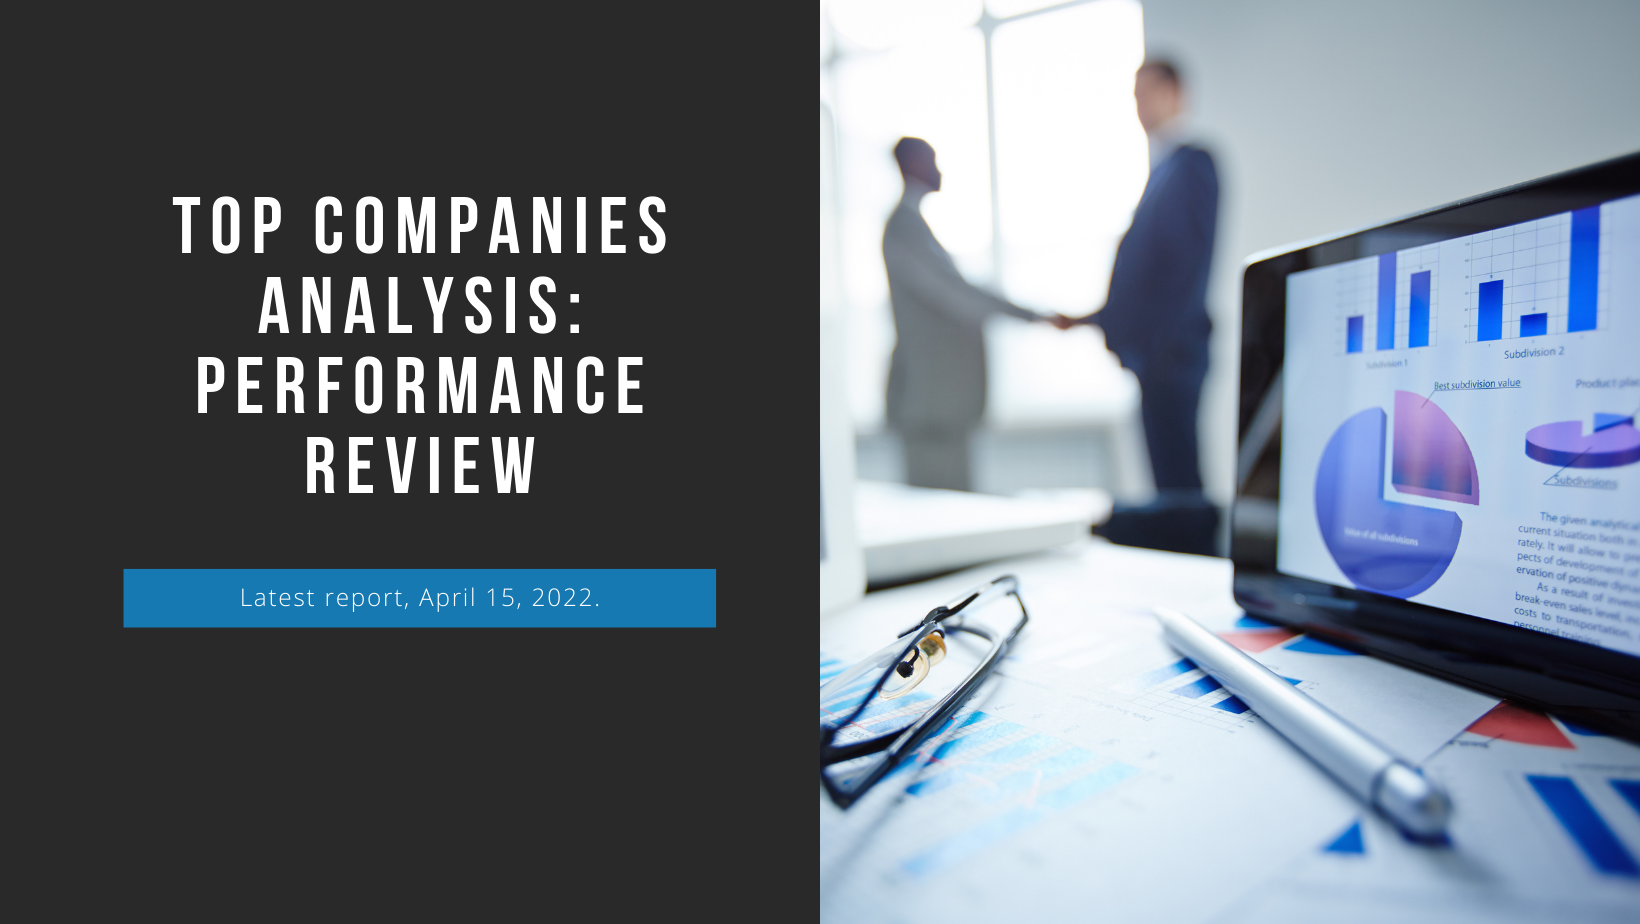 May Market Movers: Analyzing the Performance of Top Performing Companies